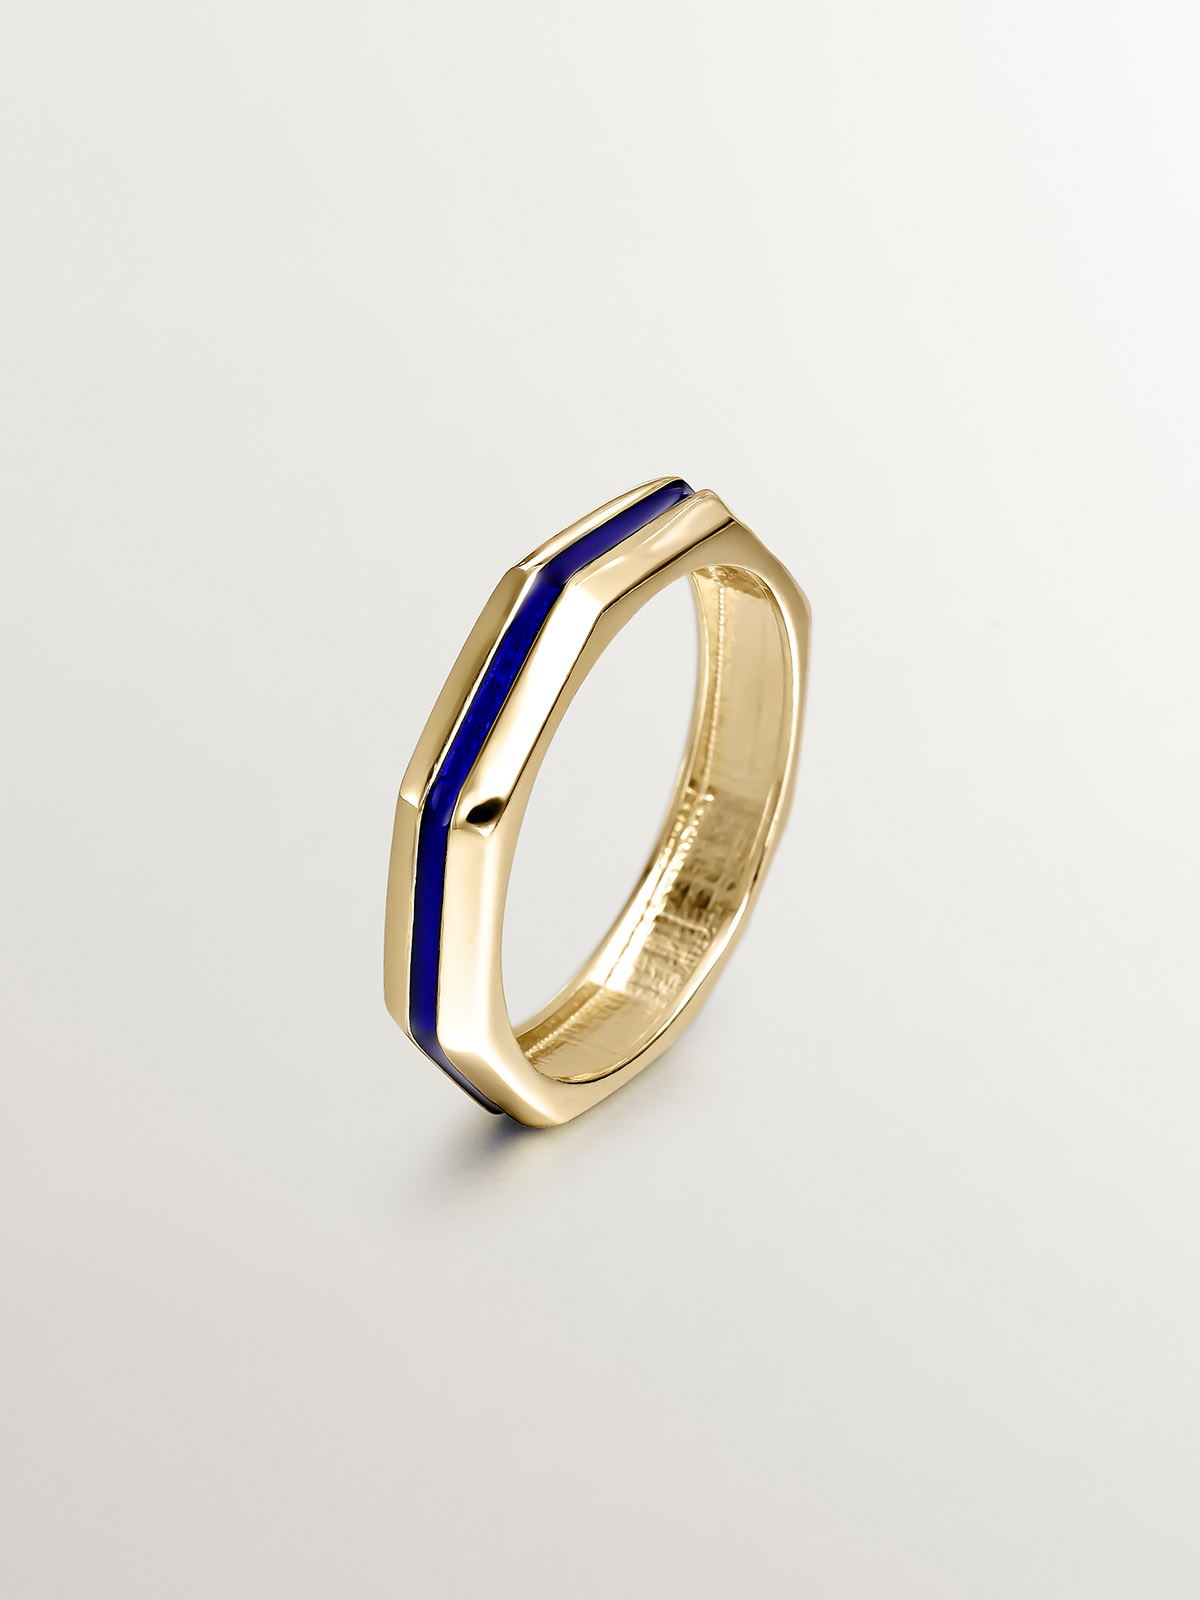 925 silver ring bathed in 18k yellow gold with geometric finish and blue enamel